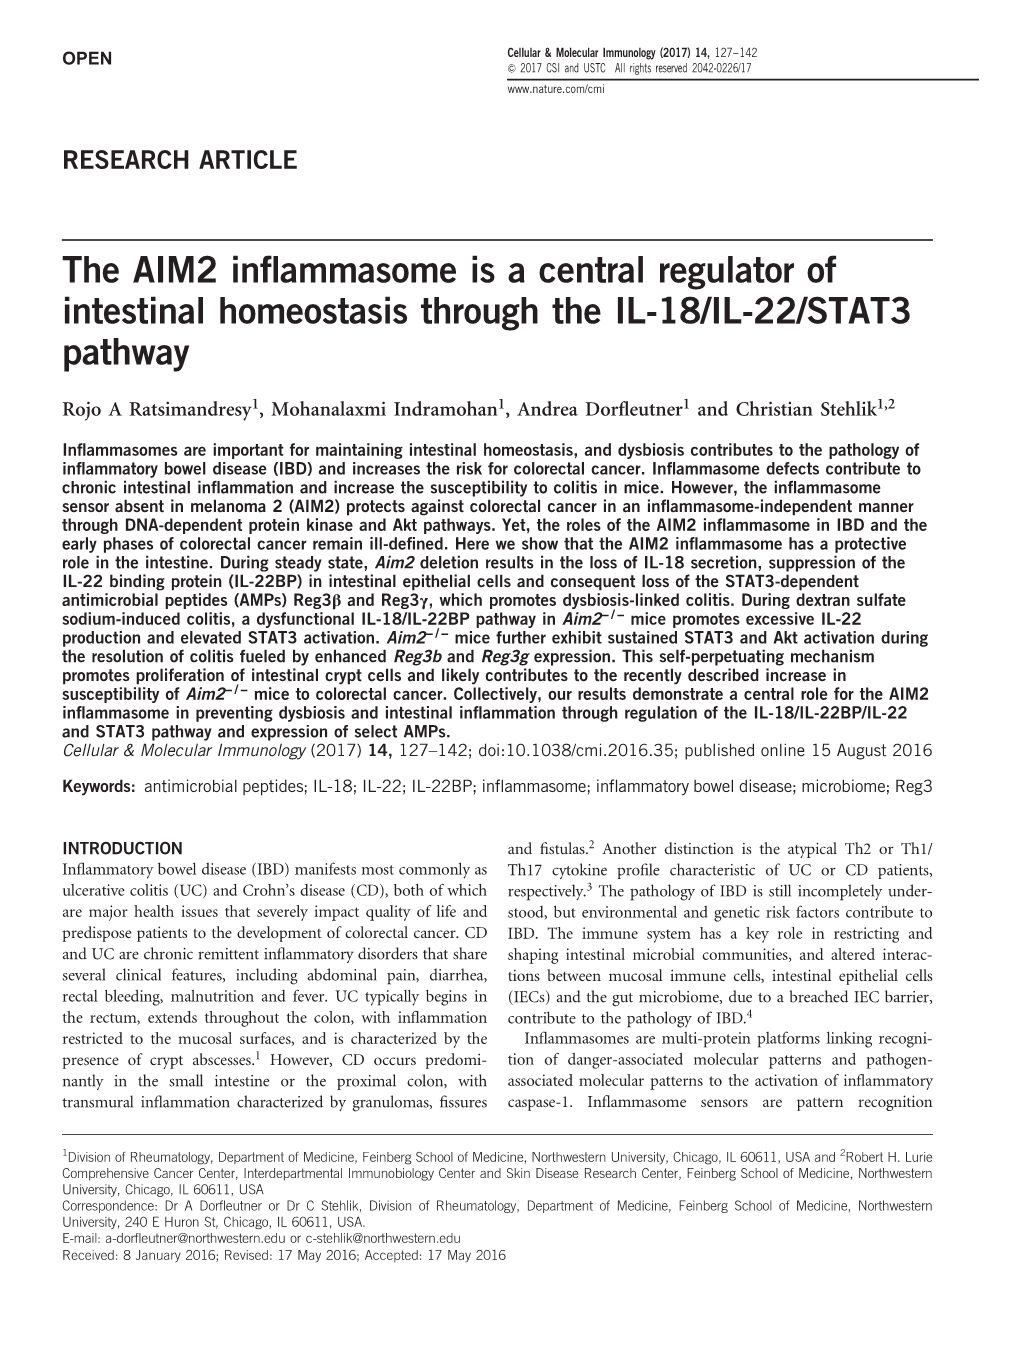 The AIM2 Inflammasome Is a Central Regulator of Intestinal